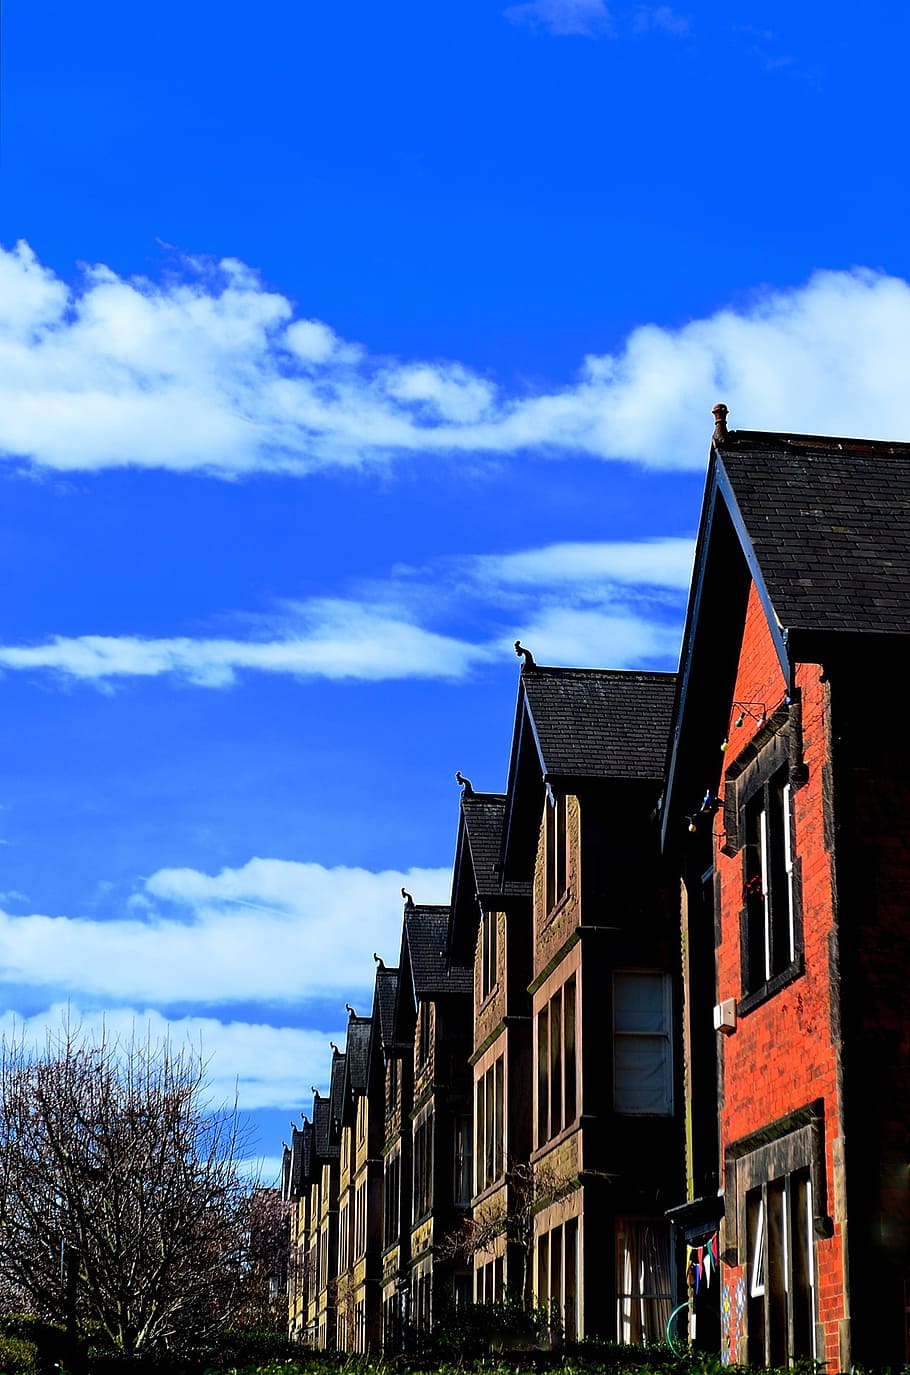 houses, home, housing, life, privacy, architecture, sky, blue, clouds, gardens